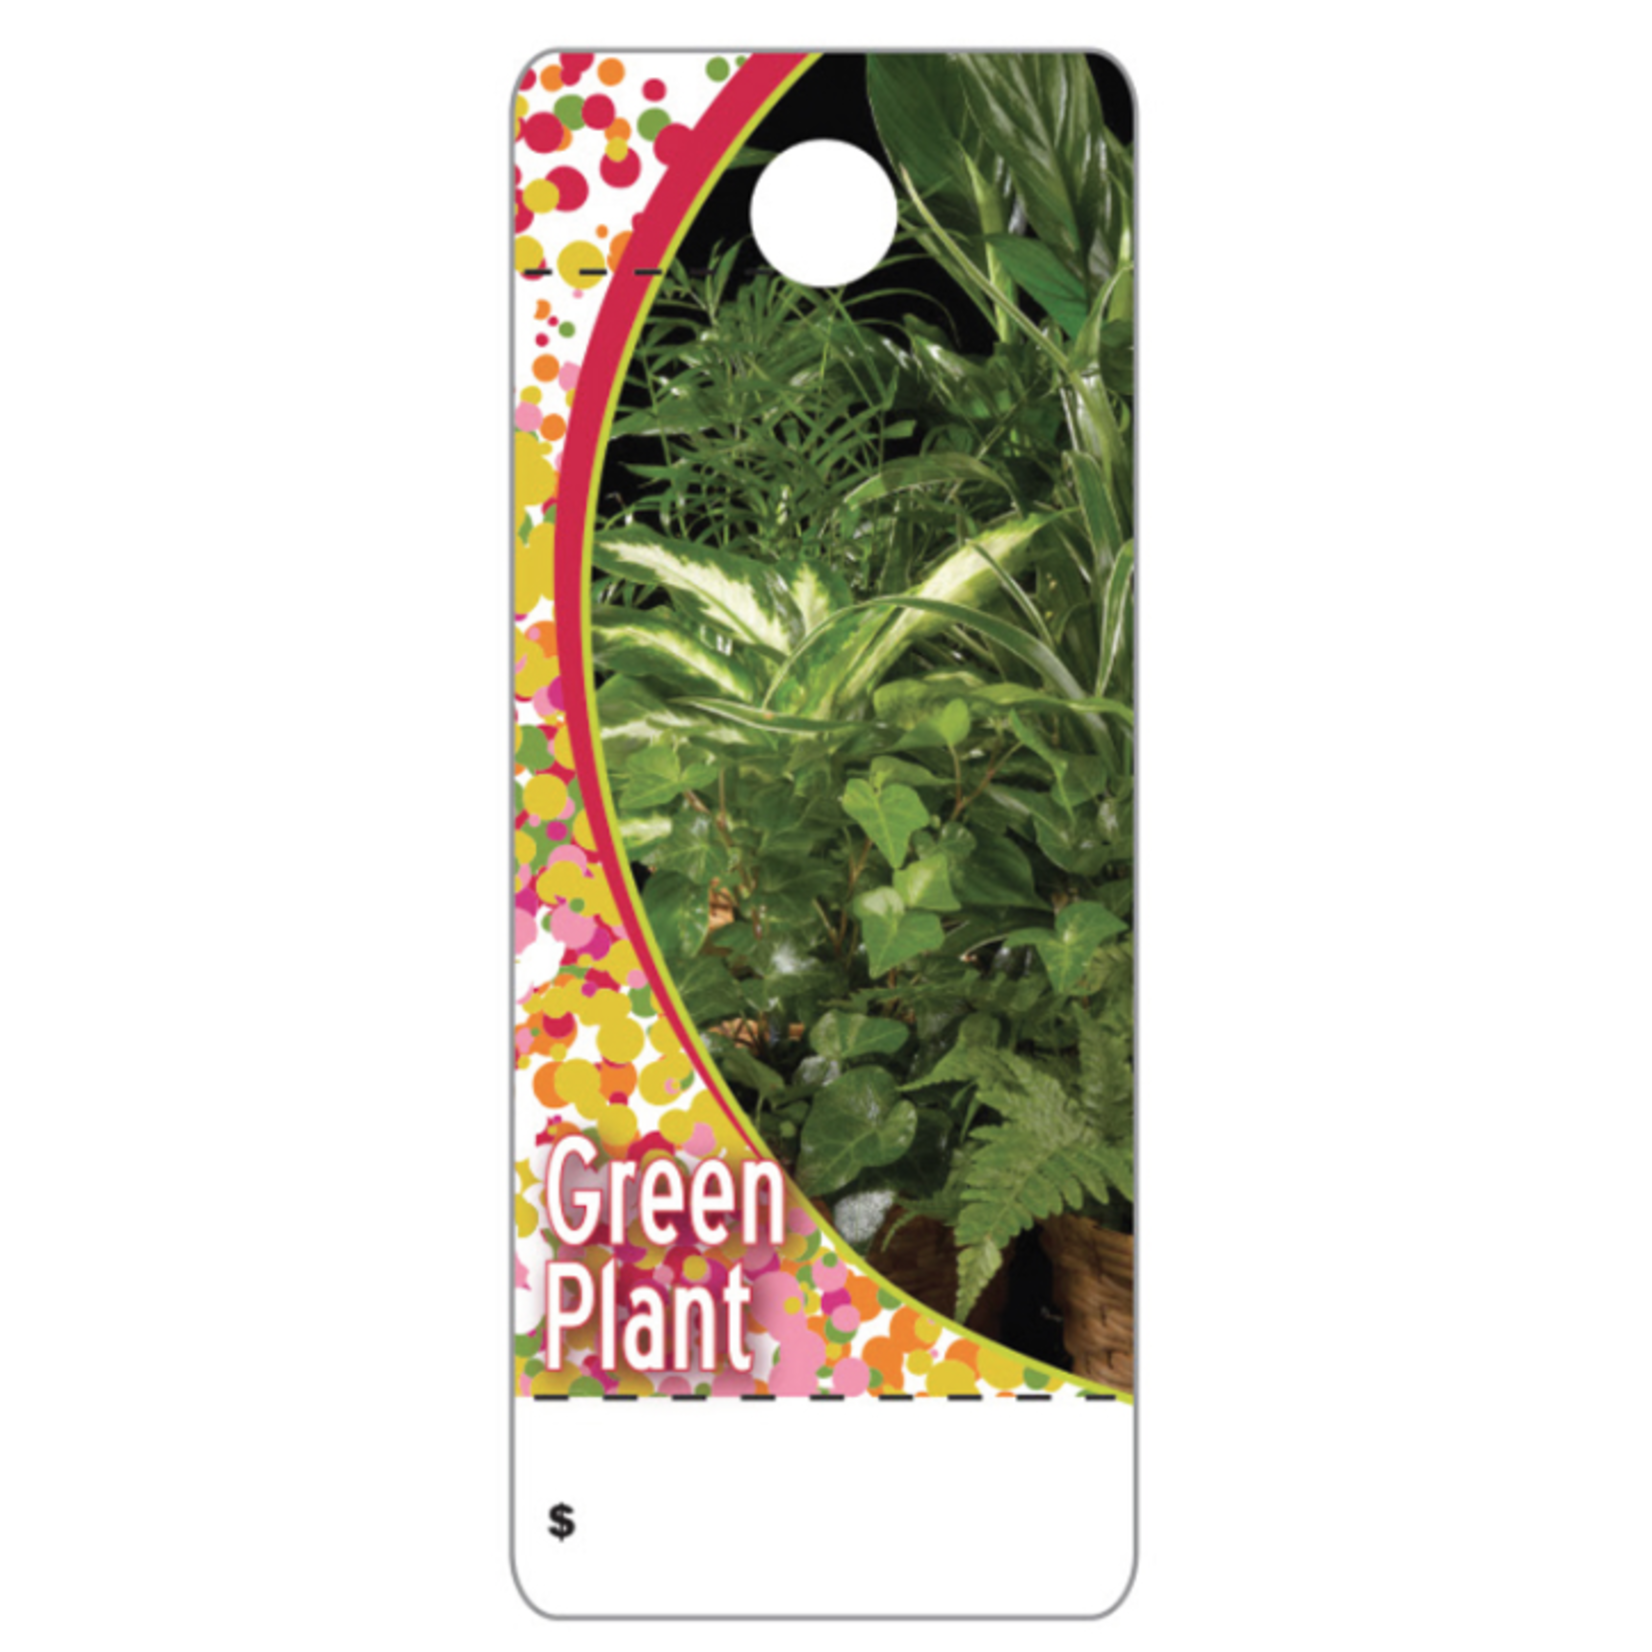 GREEN PLANT CARE TAG